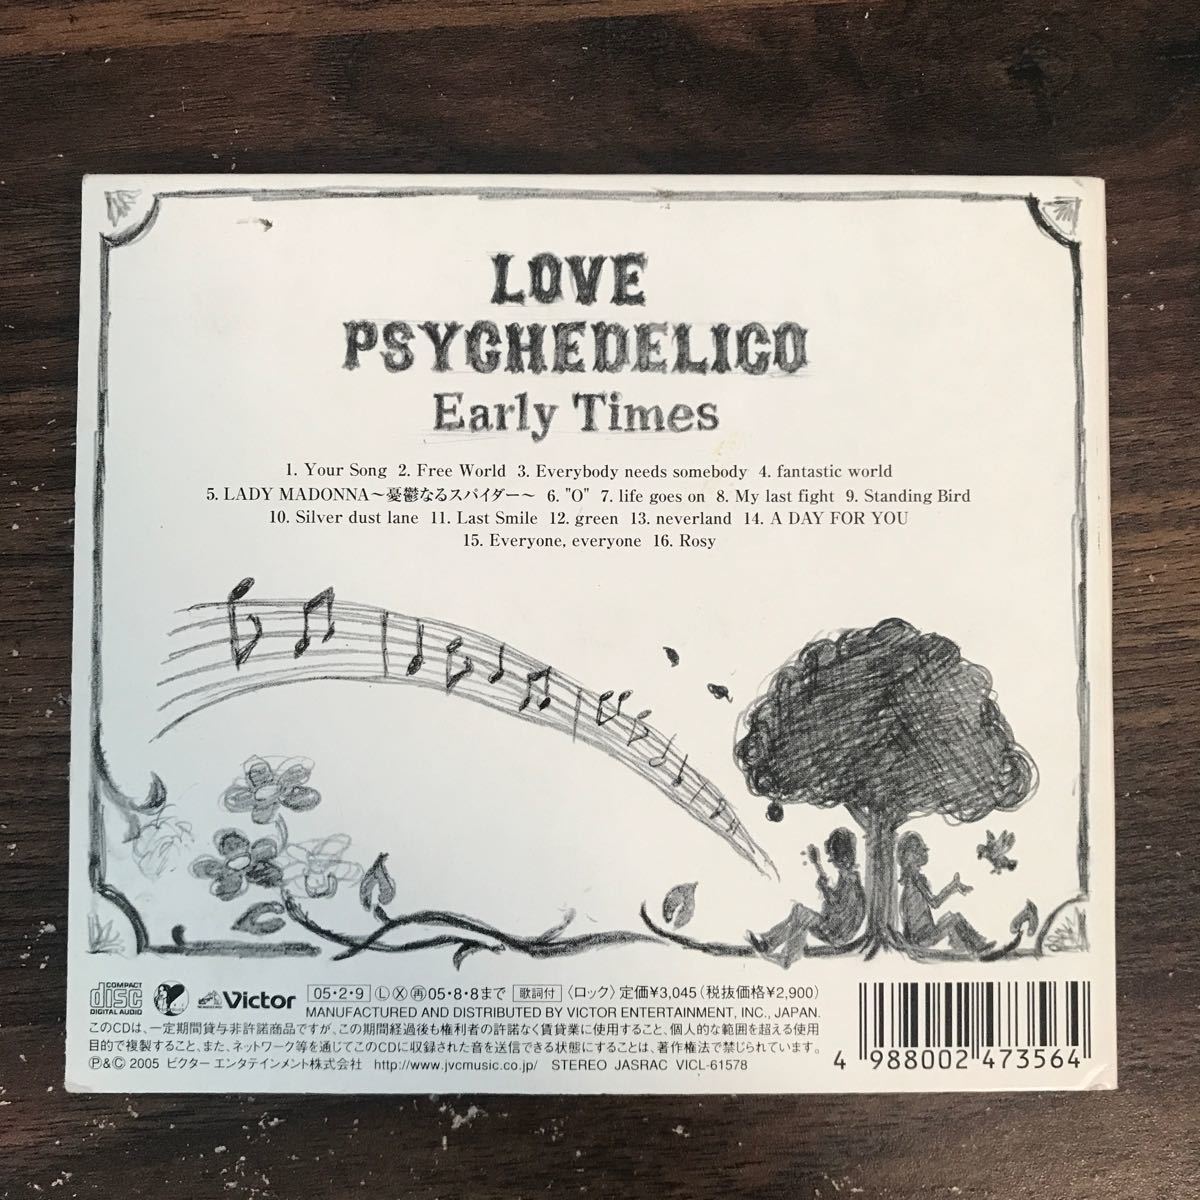 D1006 中古CD100円 LOVE PSYCHEDELICO Early Times (特殊パッケージ仕様 初回限定盤)_画像2